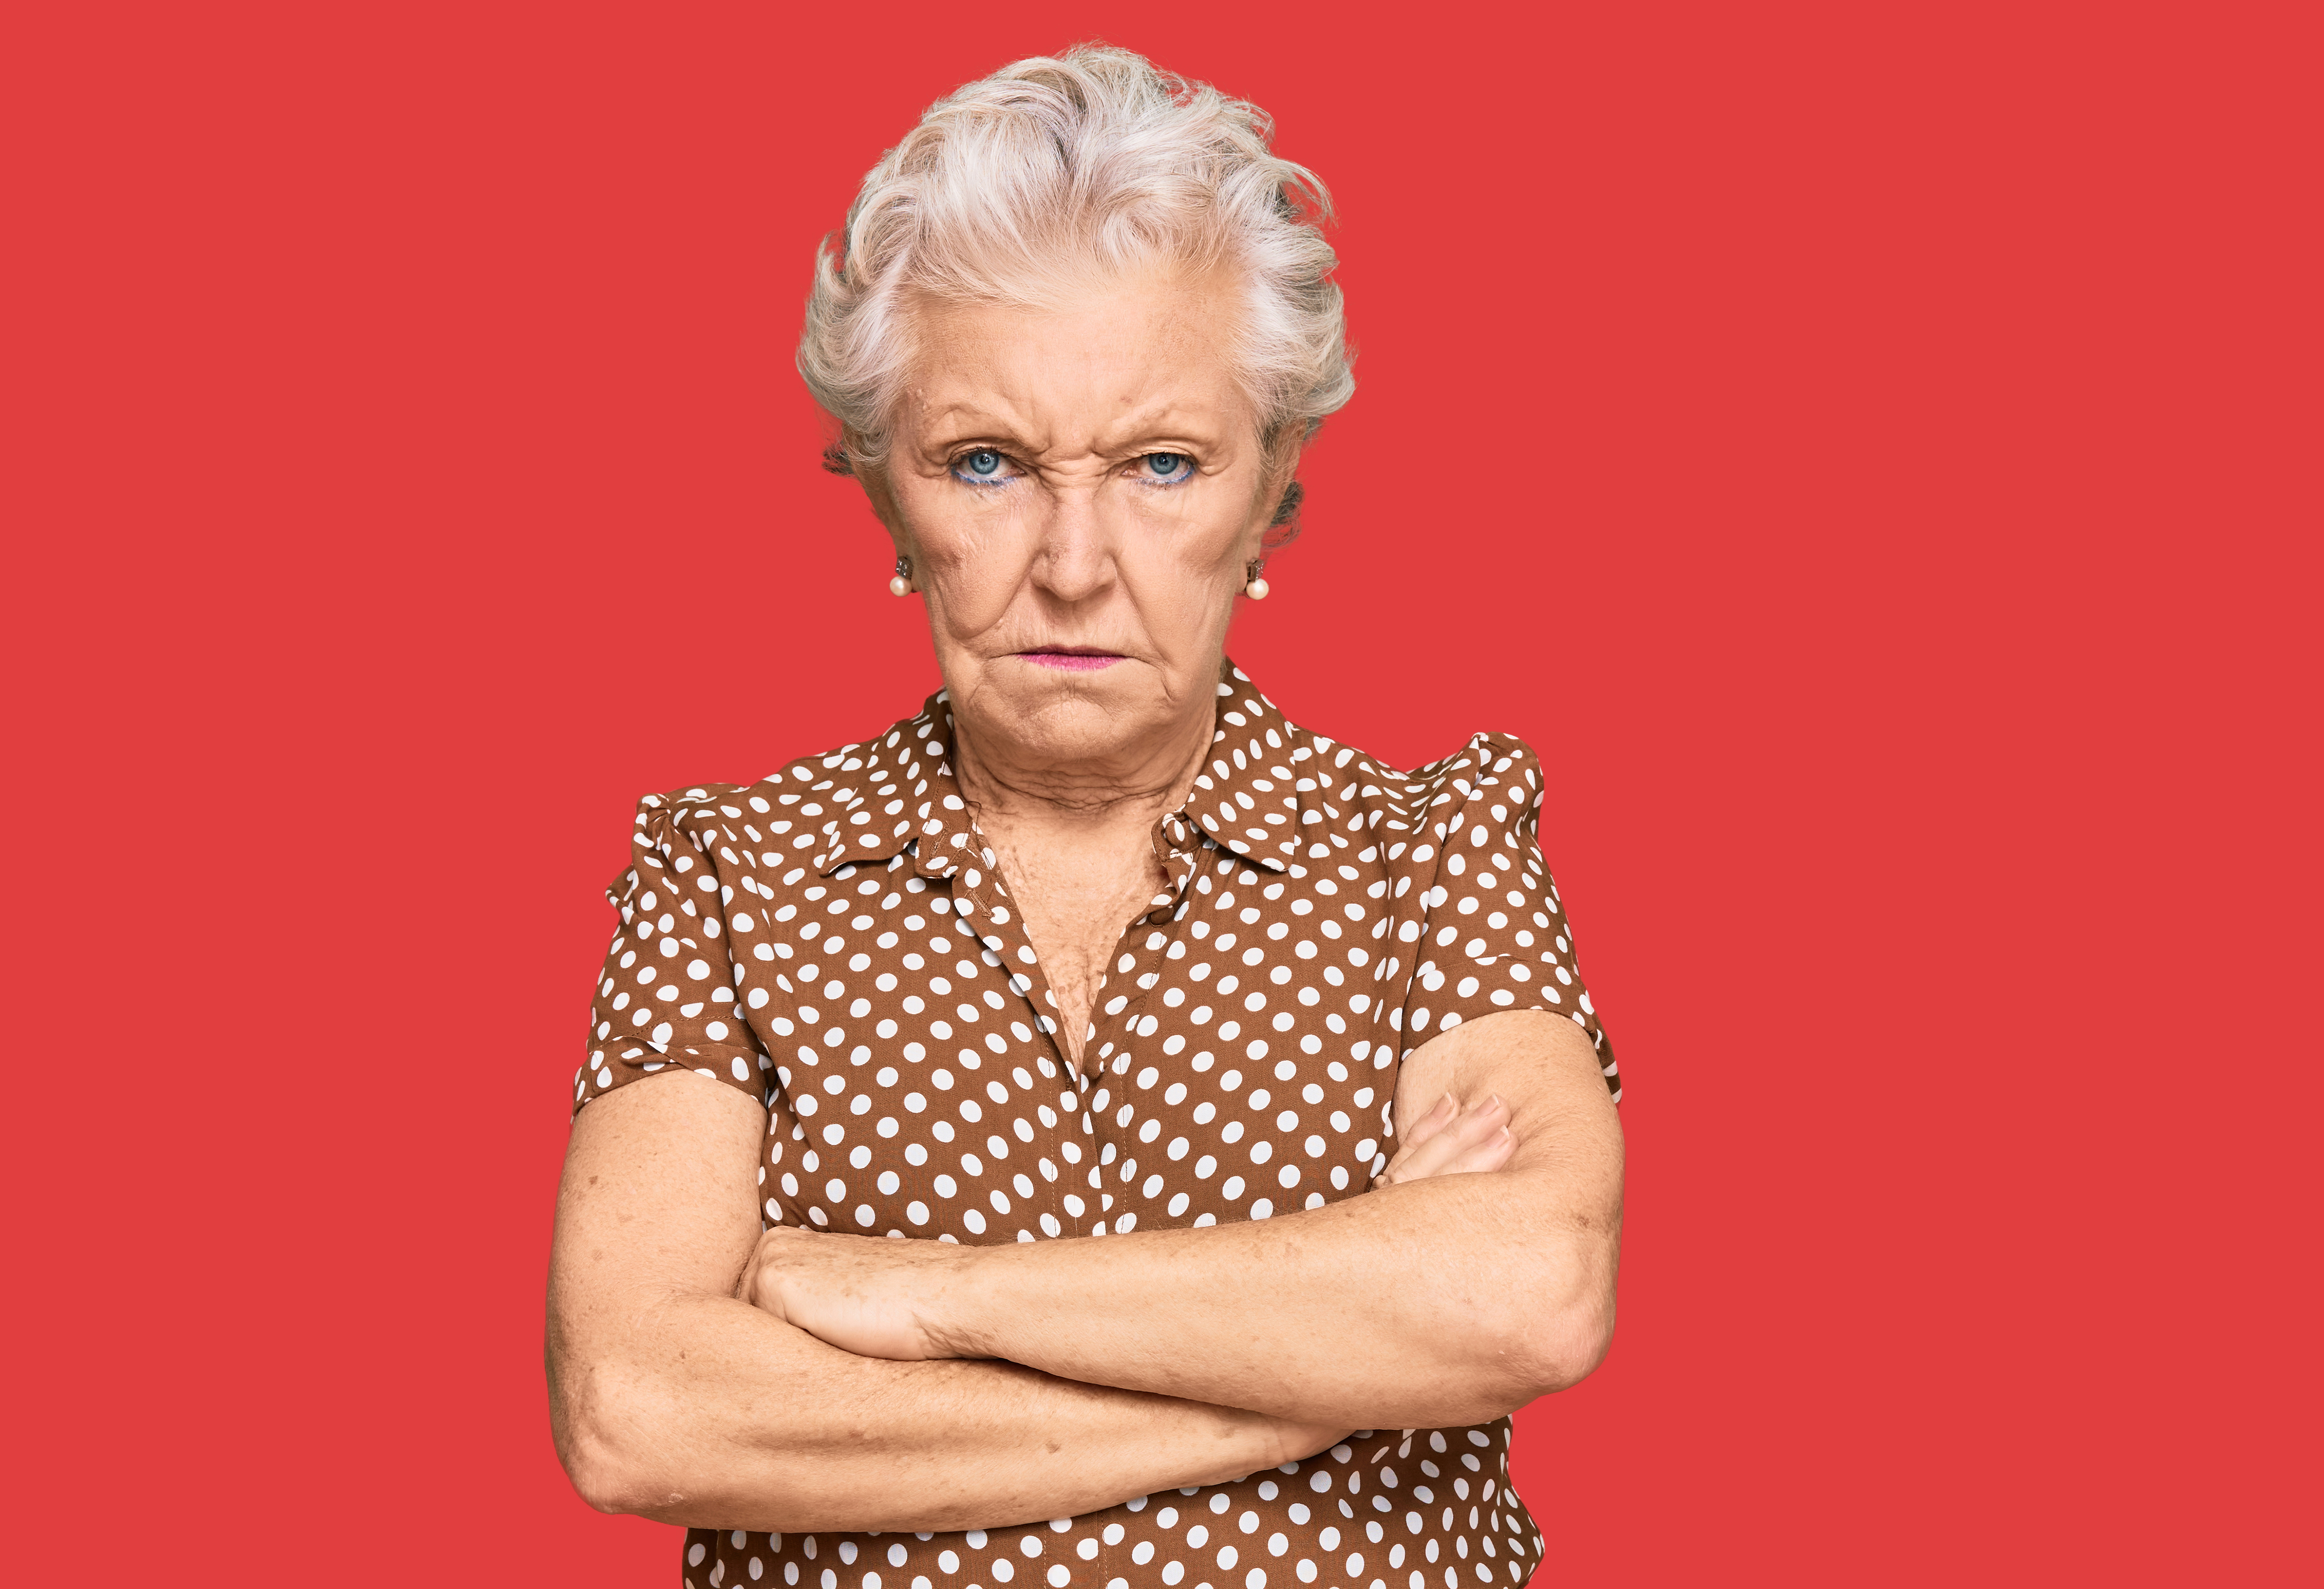 An angry elderly woman in casual clothes | Source: Shutterstock